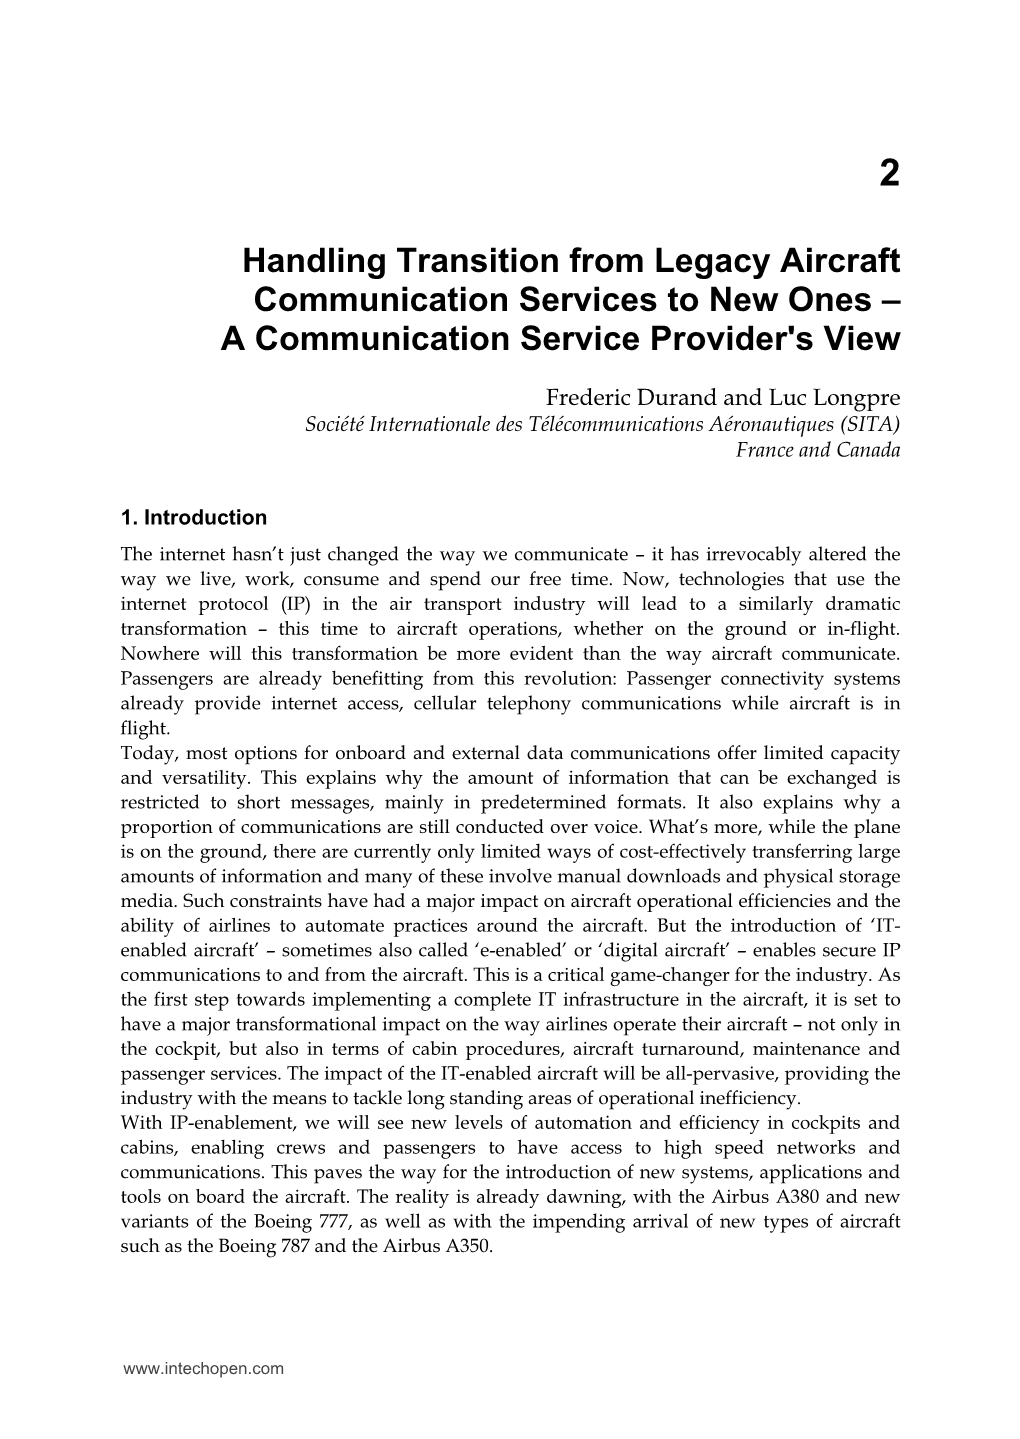 Handling Transition from Legacy Aircraft Communication Services to New Ones – a Communication Service Provider's View